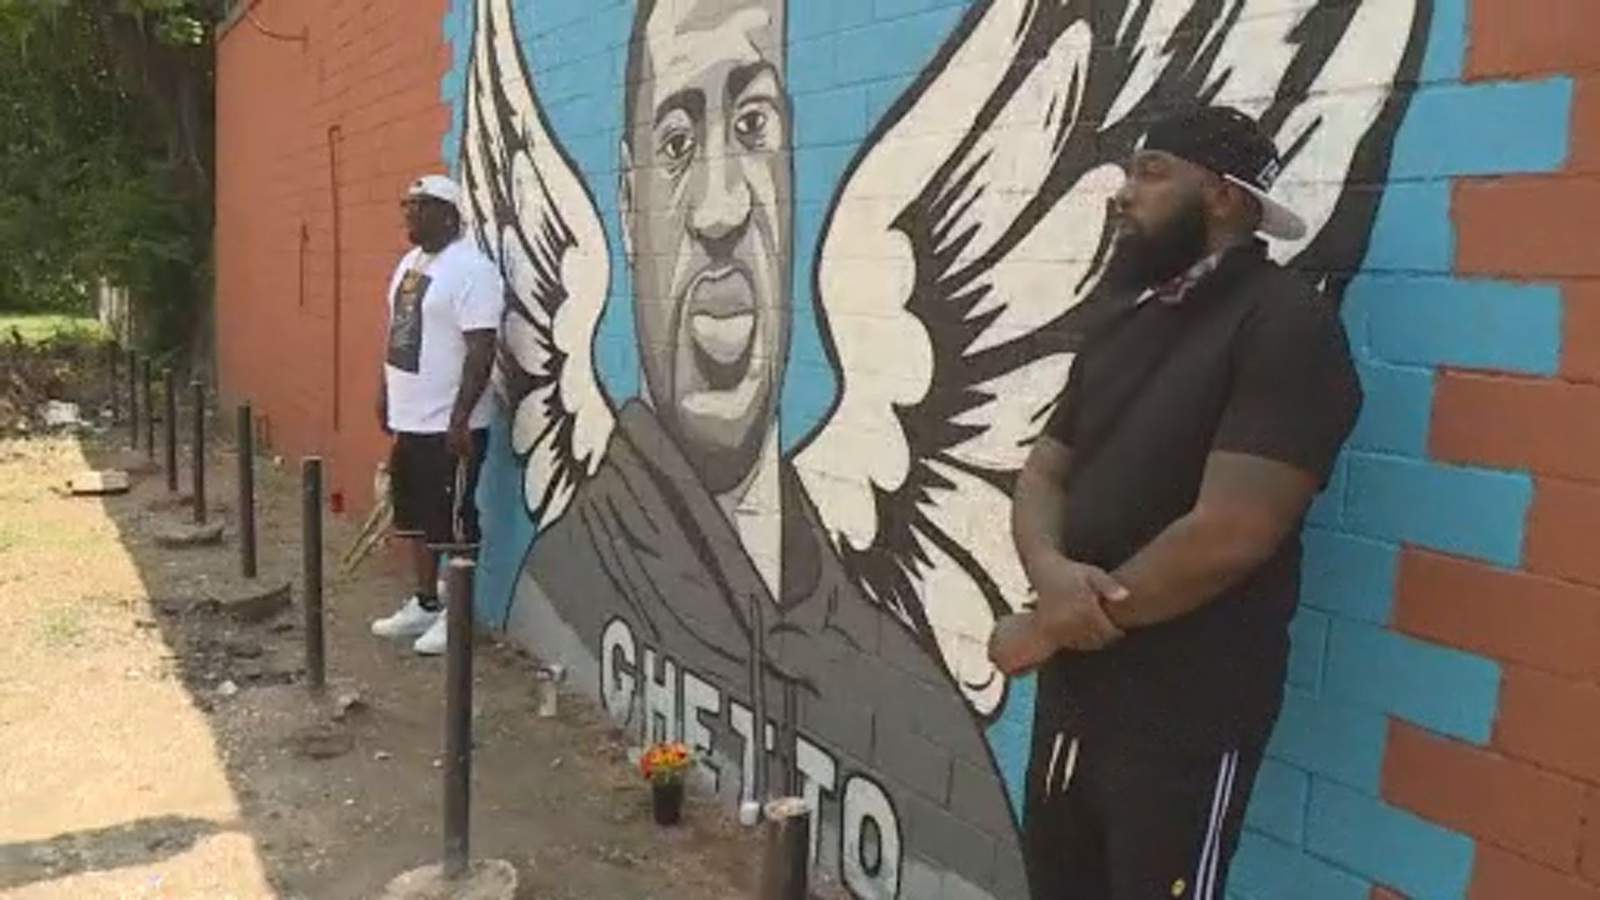 Murals painted to honor Houston native George Floyd in Third Ward